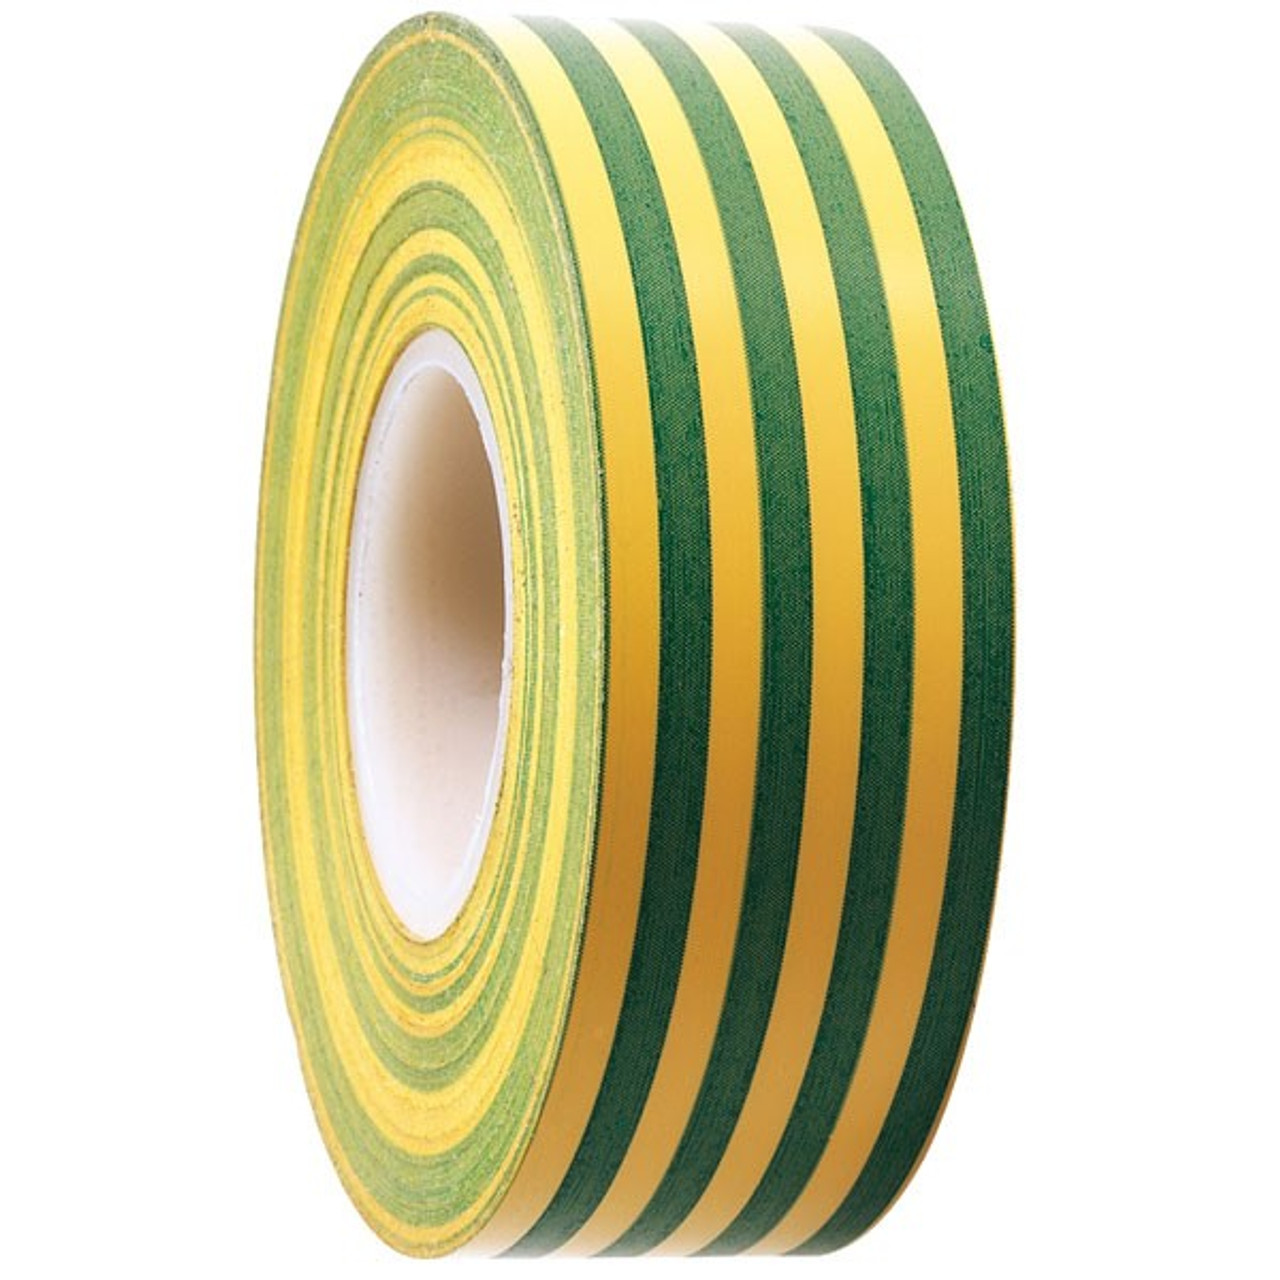 PVC Insulation Tape 18mmx20m Yellow/Green (Pack of 10)